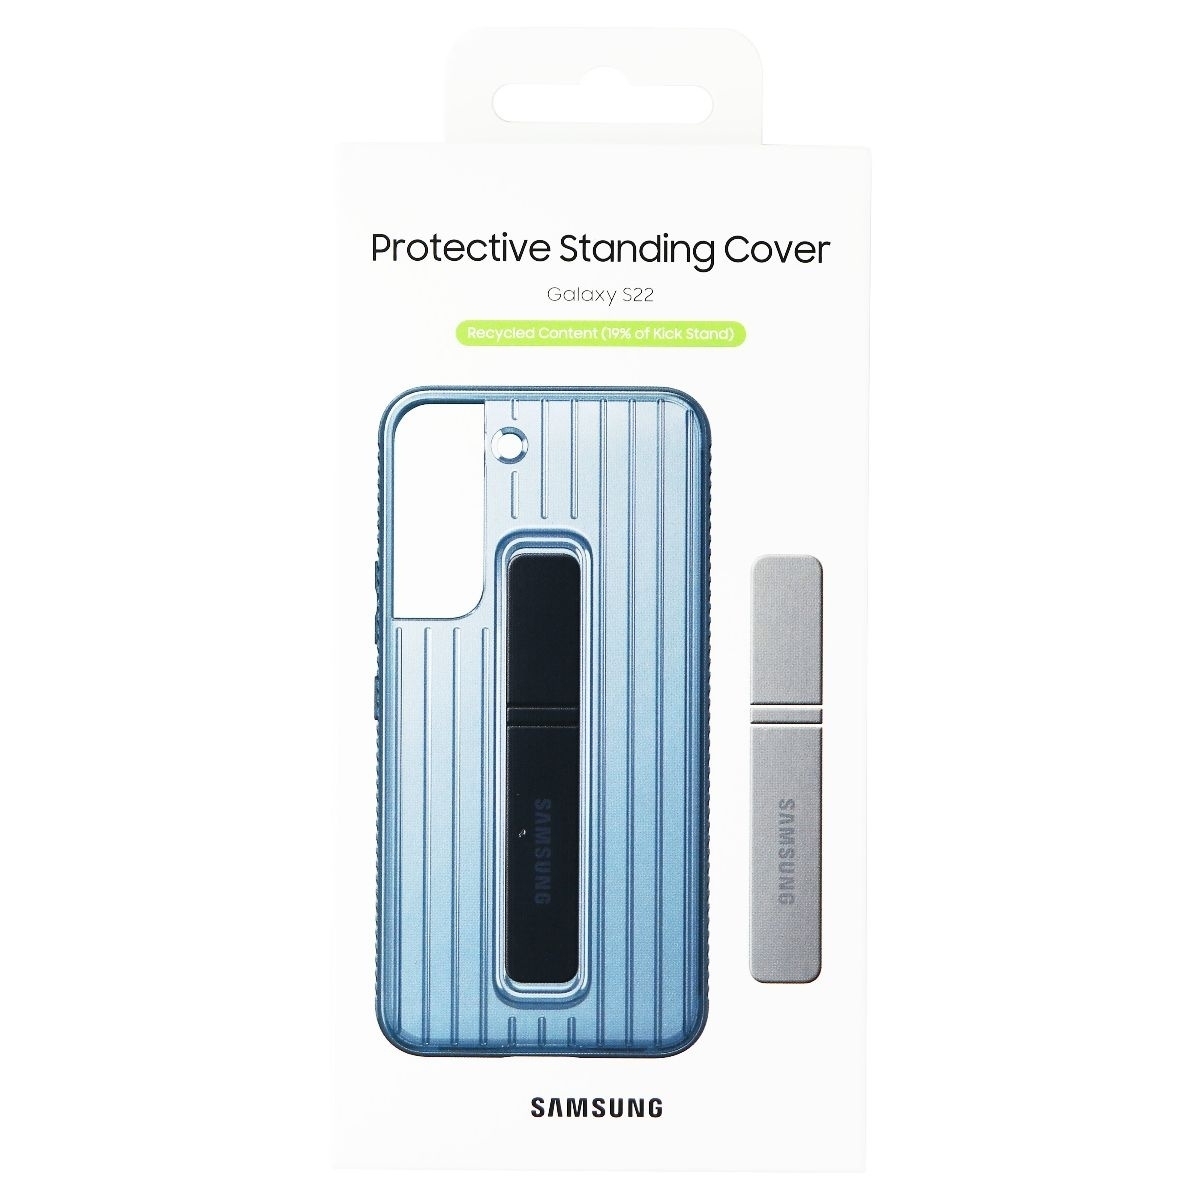 Samsung Protective Standing Cover For Samsung Galaxy S22 - Navy